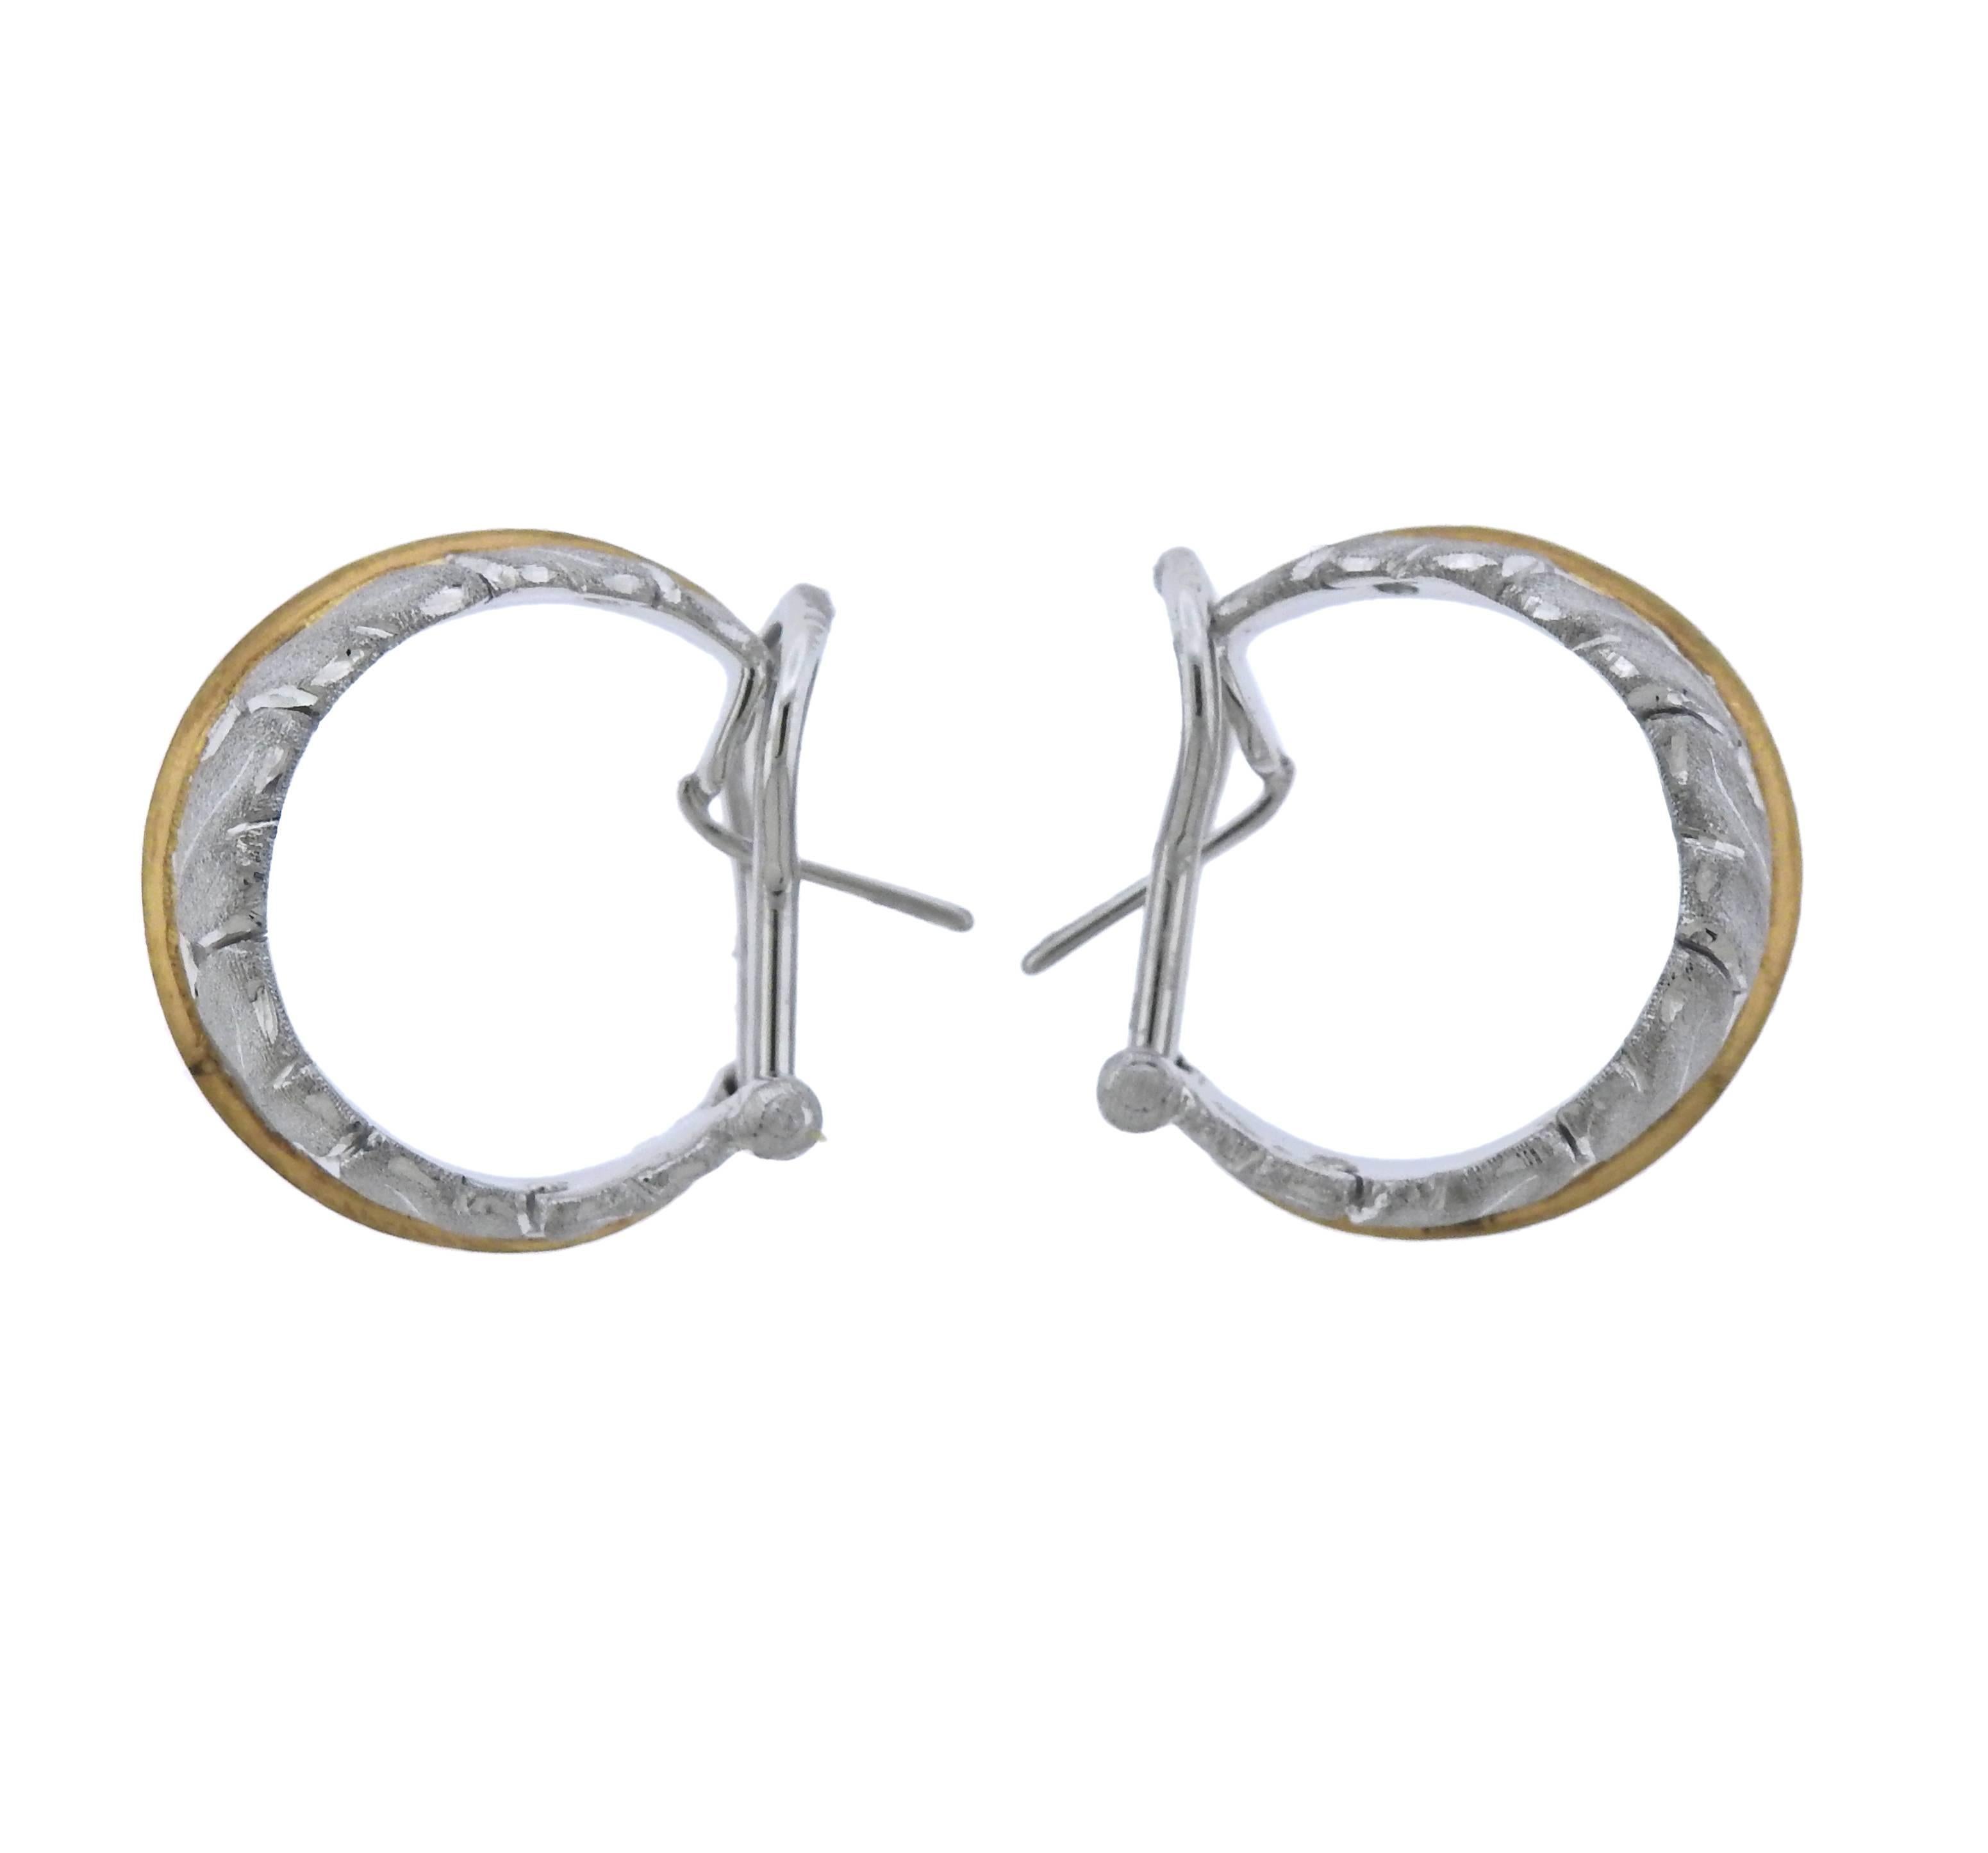 Pair of 18k white and yellow gold hoop earrings, featuring iconic leaf motif. Crafted by Buccellati, Retail $11100.  Earrings 20mm x 11mm, weigh 20.1 grams. Marked: Buccellati, Italy 18k, R6191.